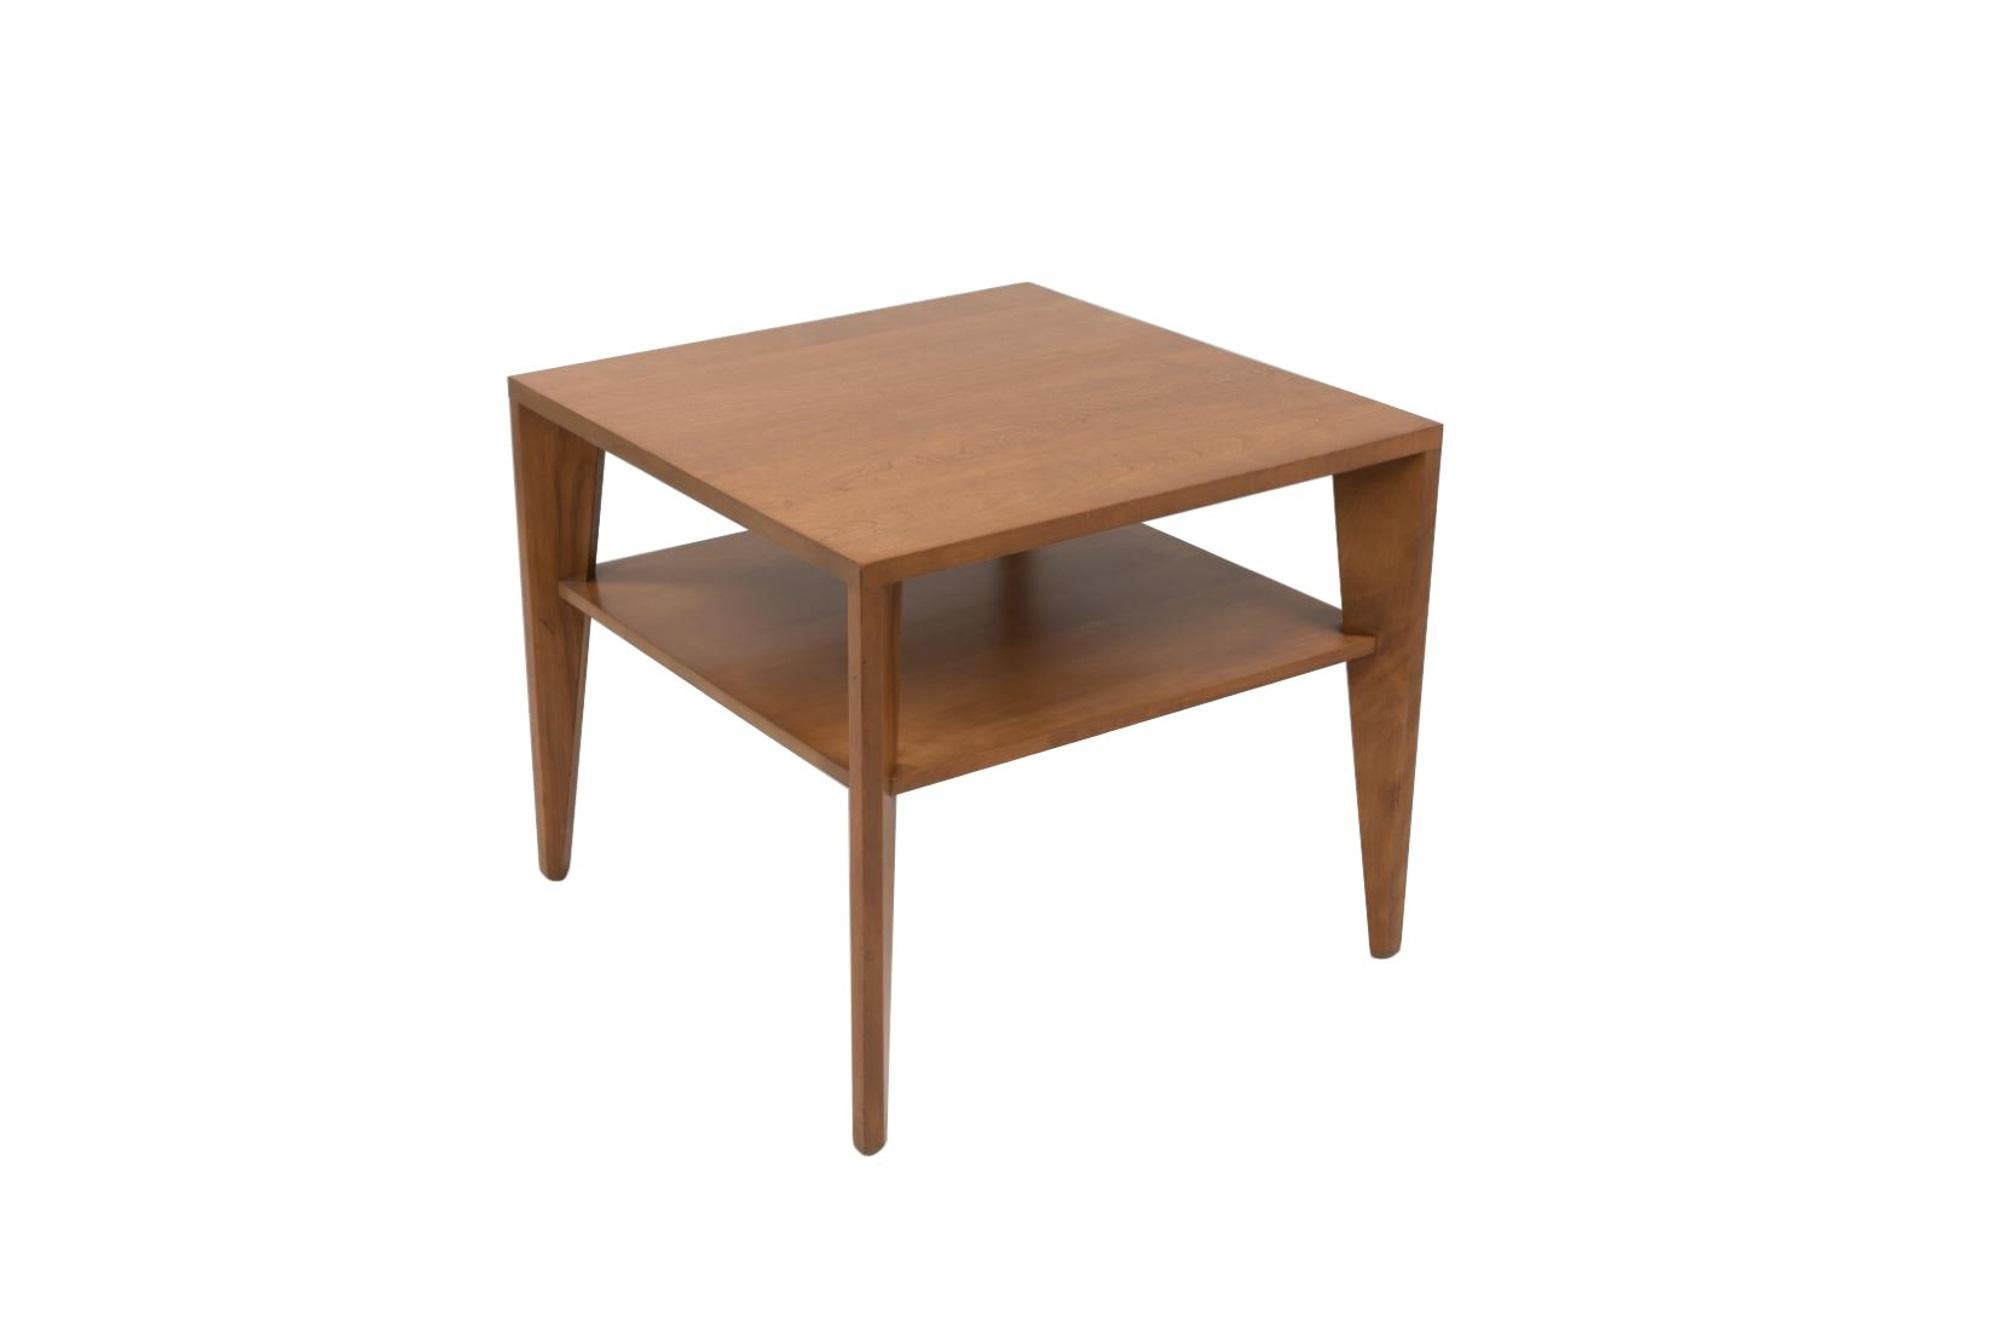 American Modernist Russel Wright Square Tables by Conant Ball For Sale